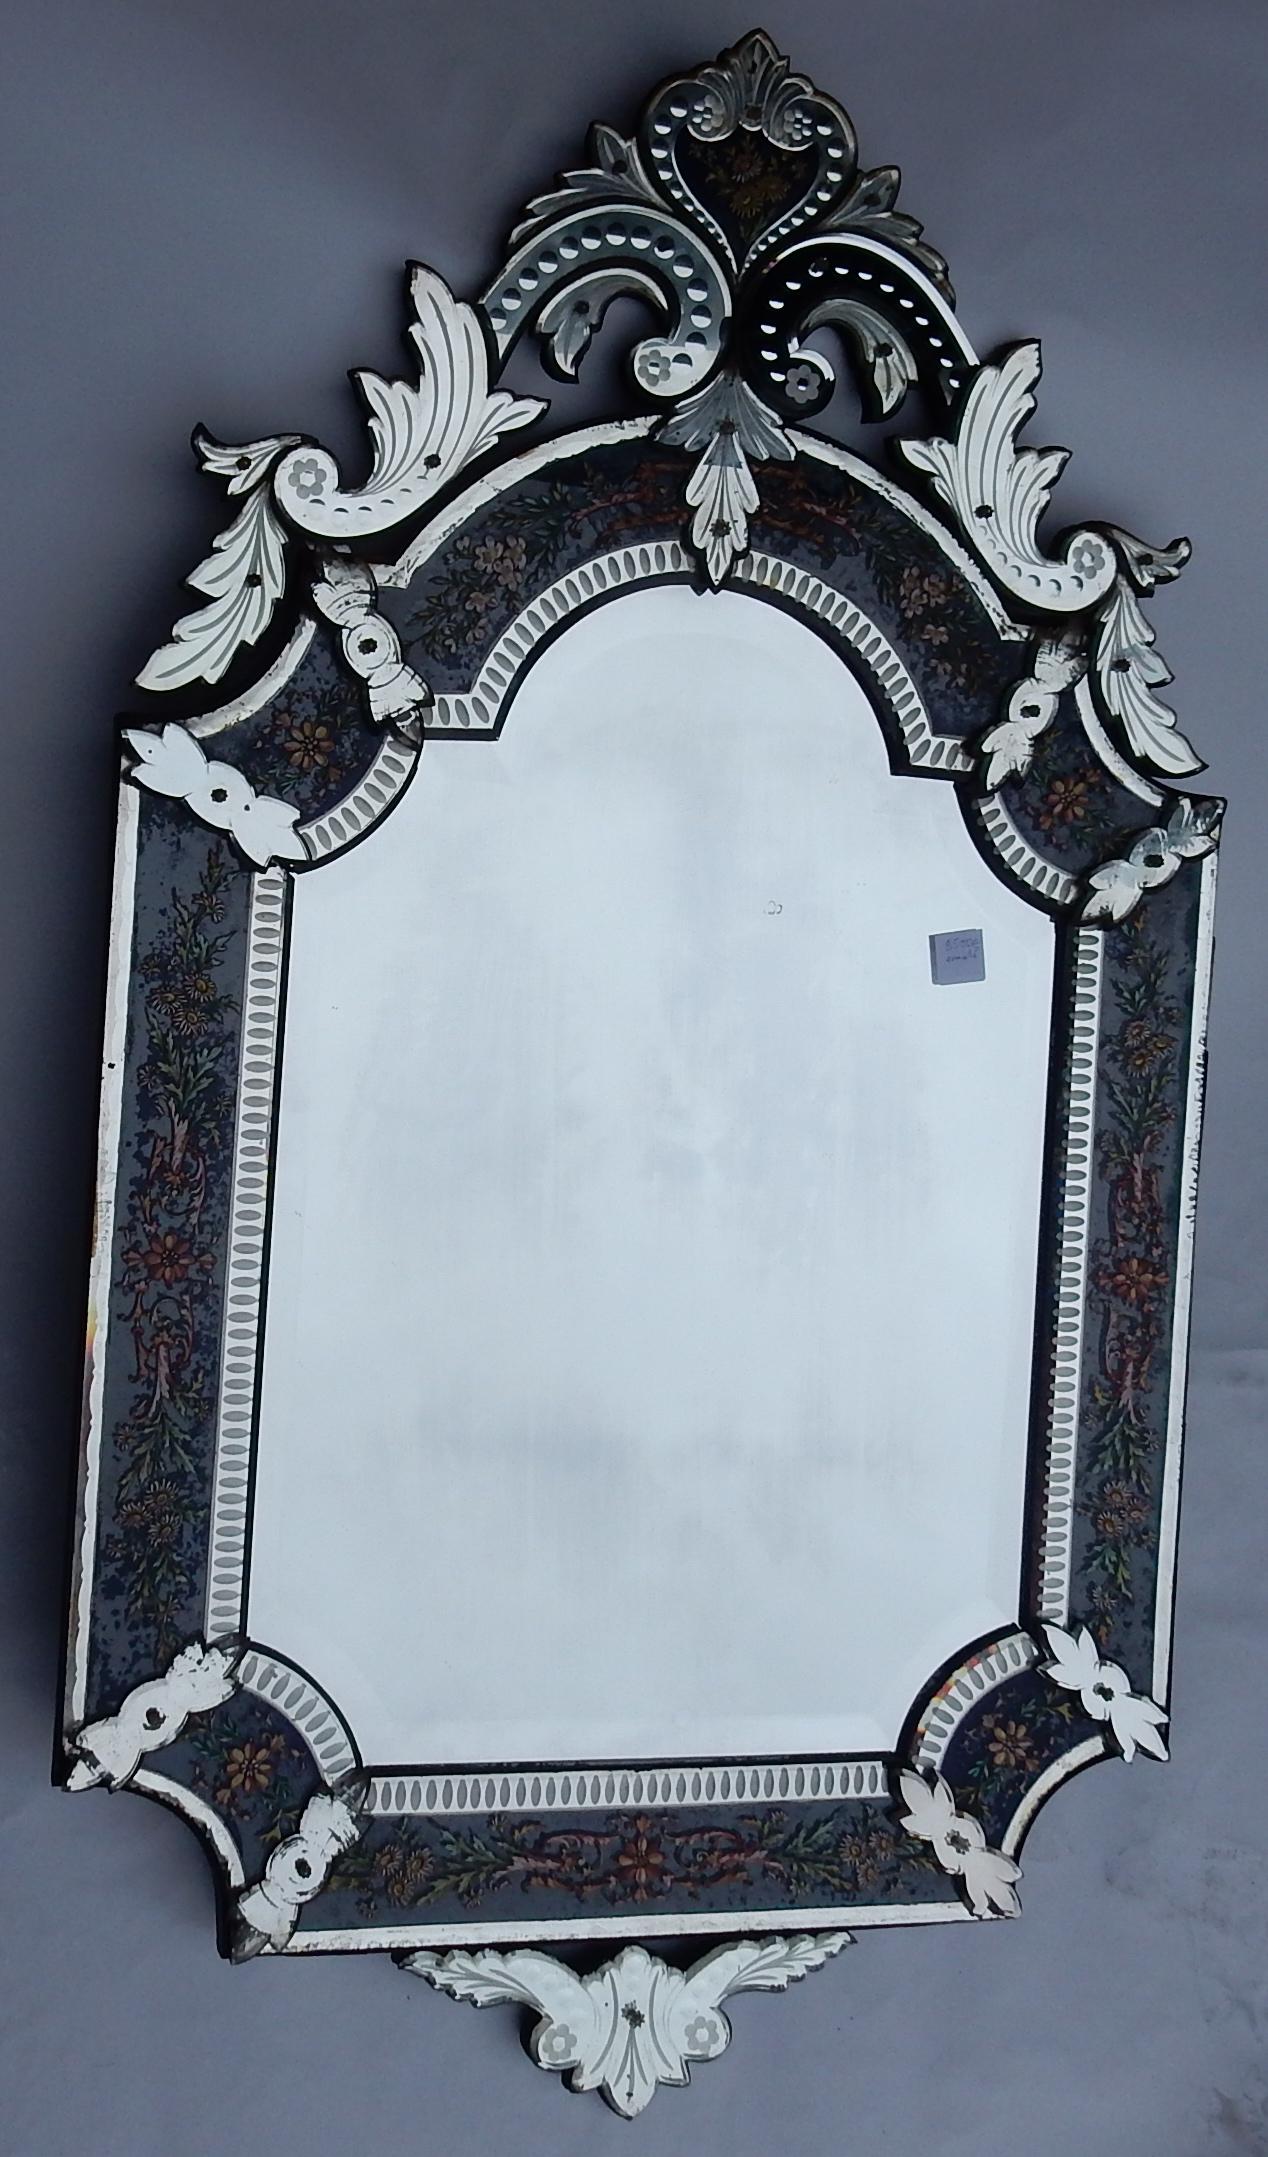 Late 19th Century 1880-1900 Venetian Mirror N3 with Pediment, Blue Glass Adorned with Flowers For Sale